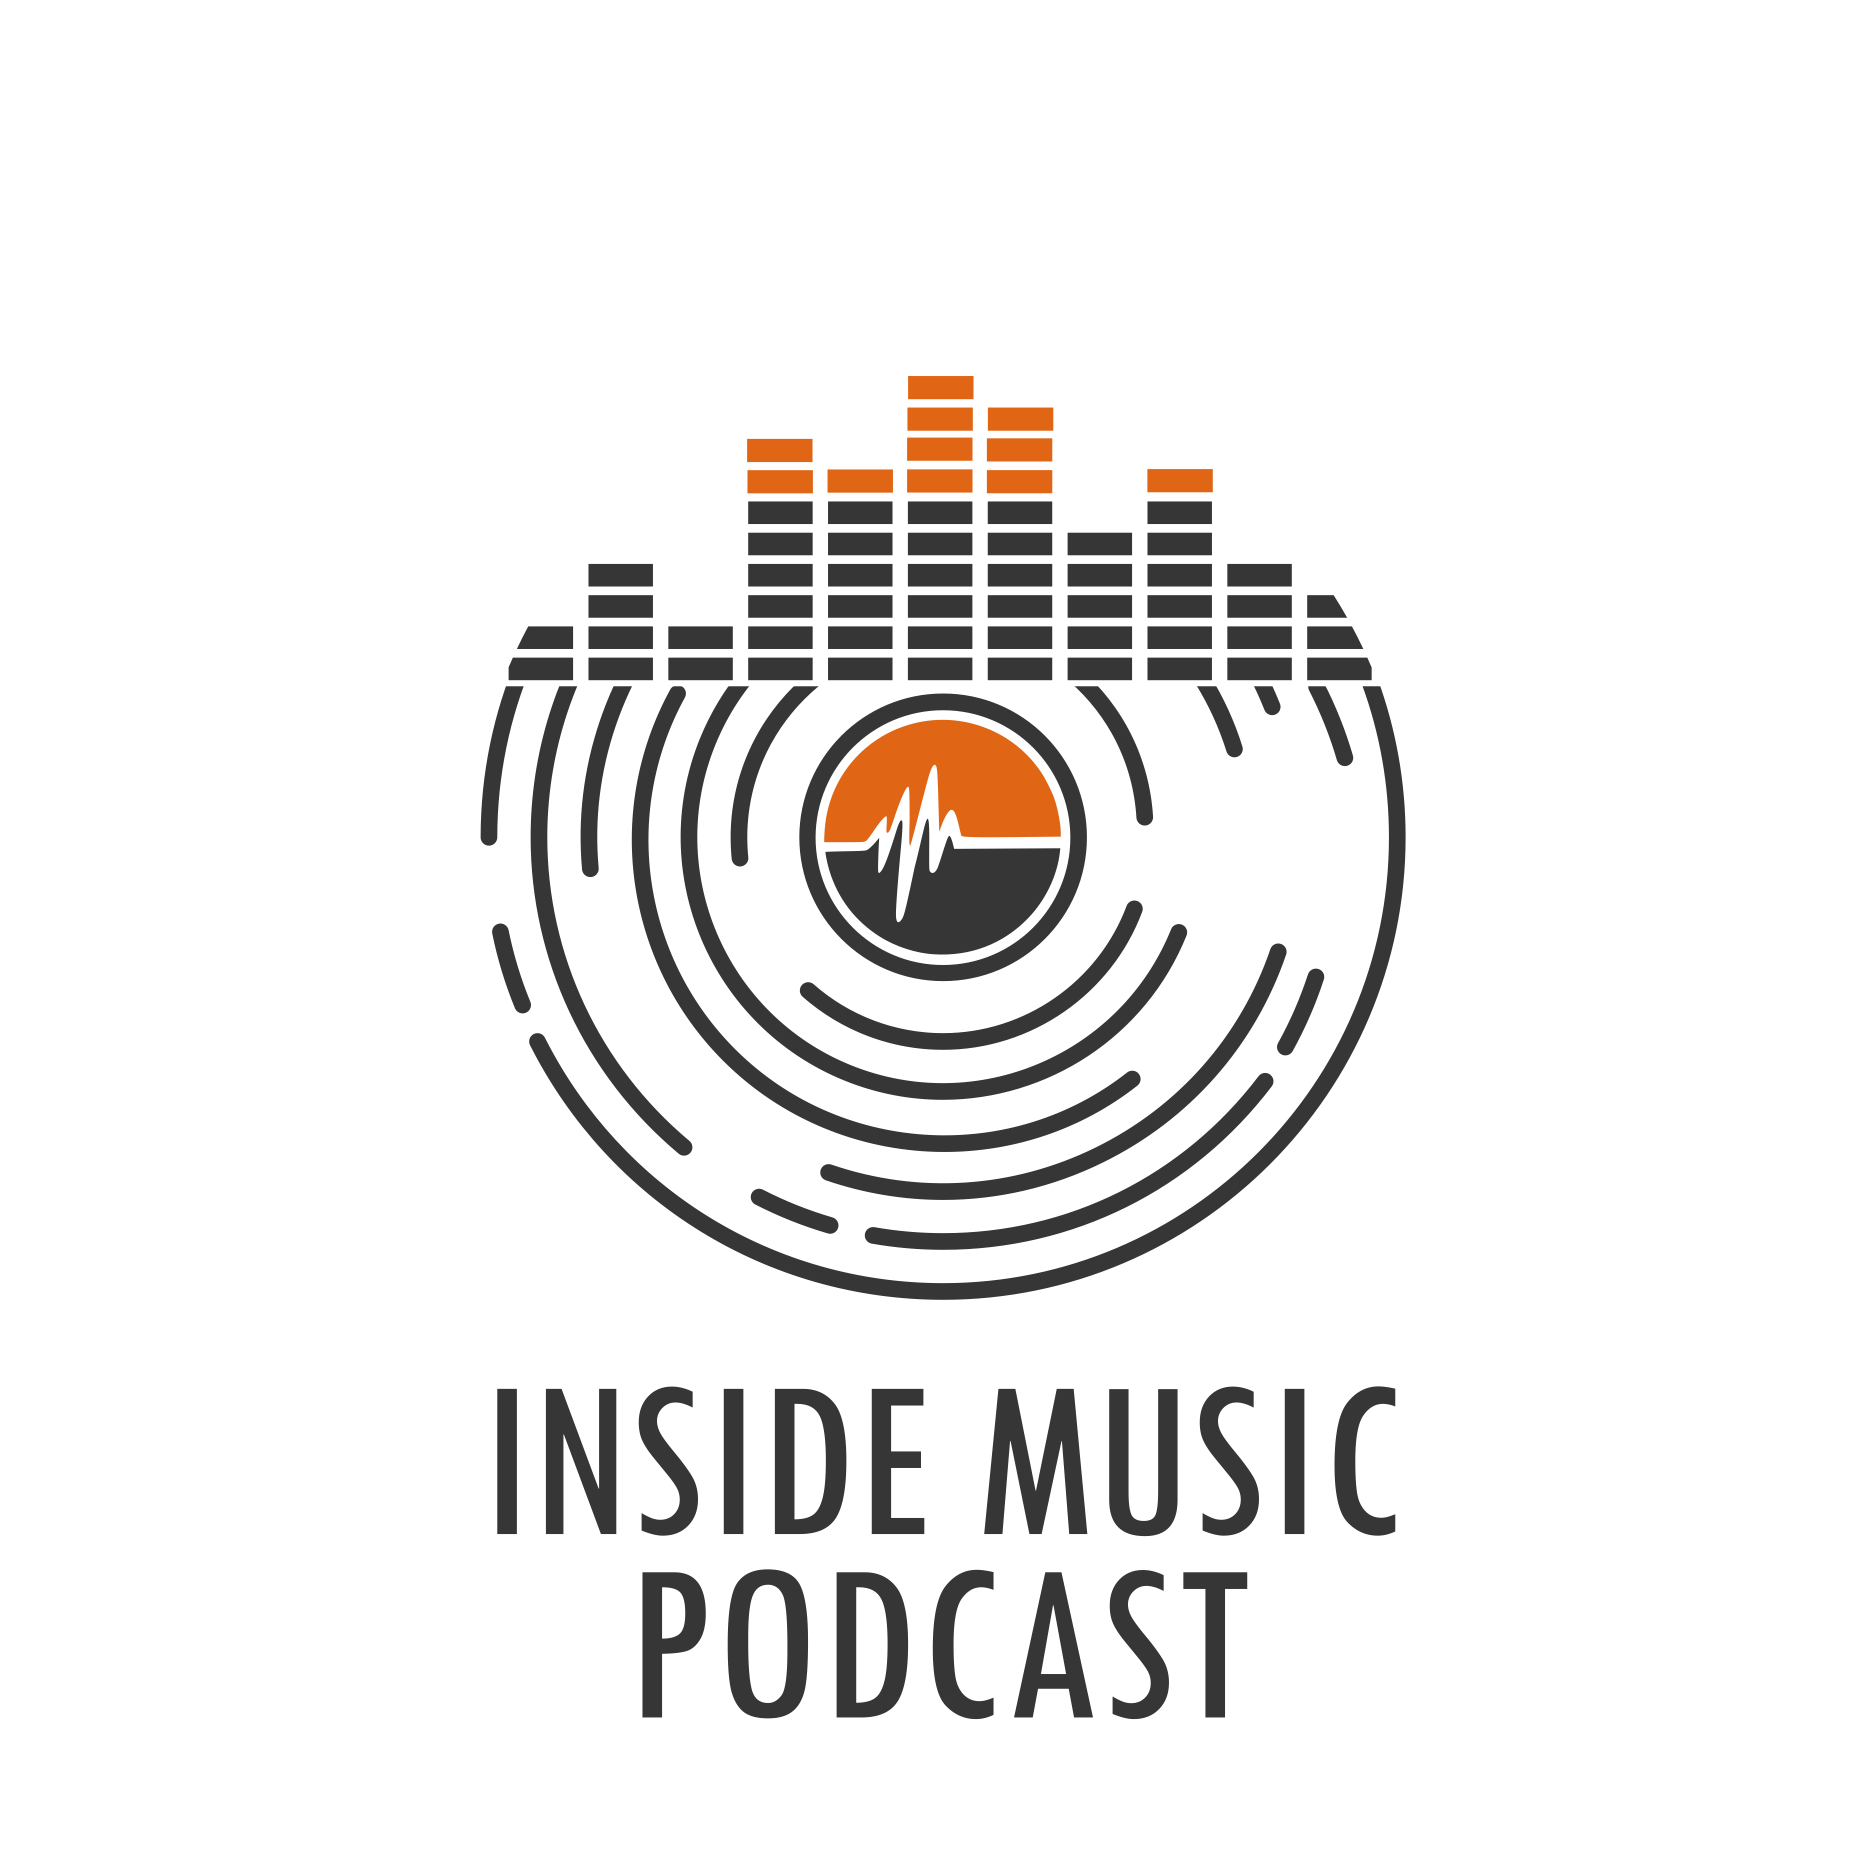 Inside Music, Podcast, James Shotwell, Music Business, Music Industry